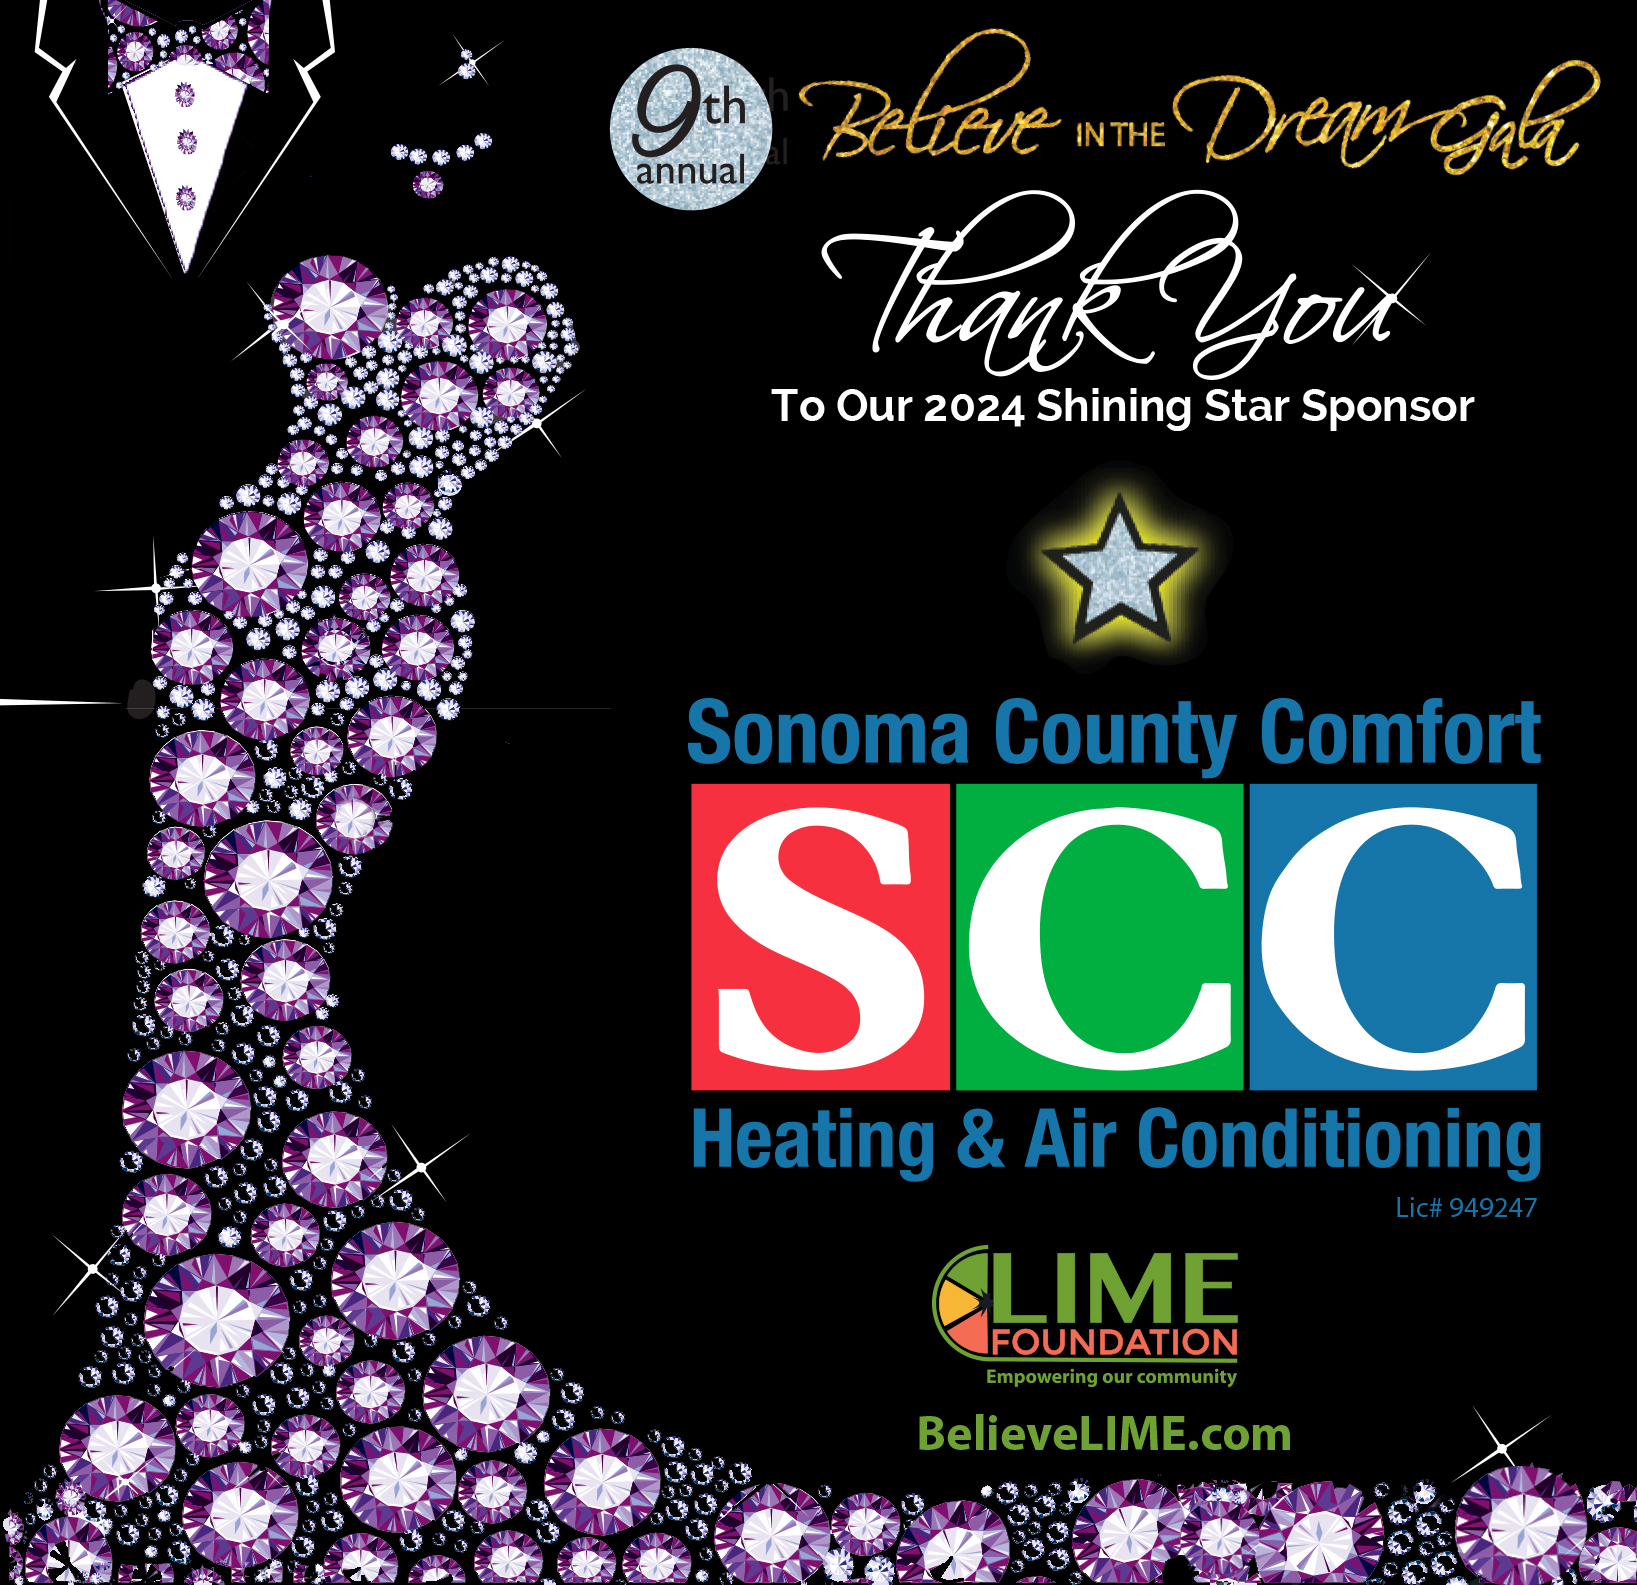 A promotional poster for the "Believe The Dream 2024" gala featuring a sparkling dress design, with logos for Sonoma County Comfort and Believe Foundation.